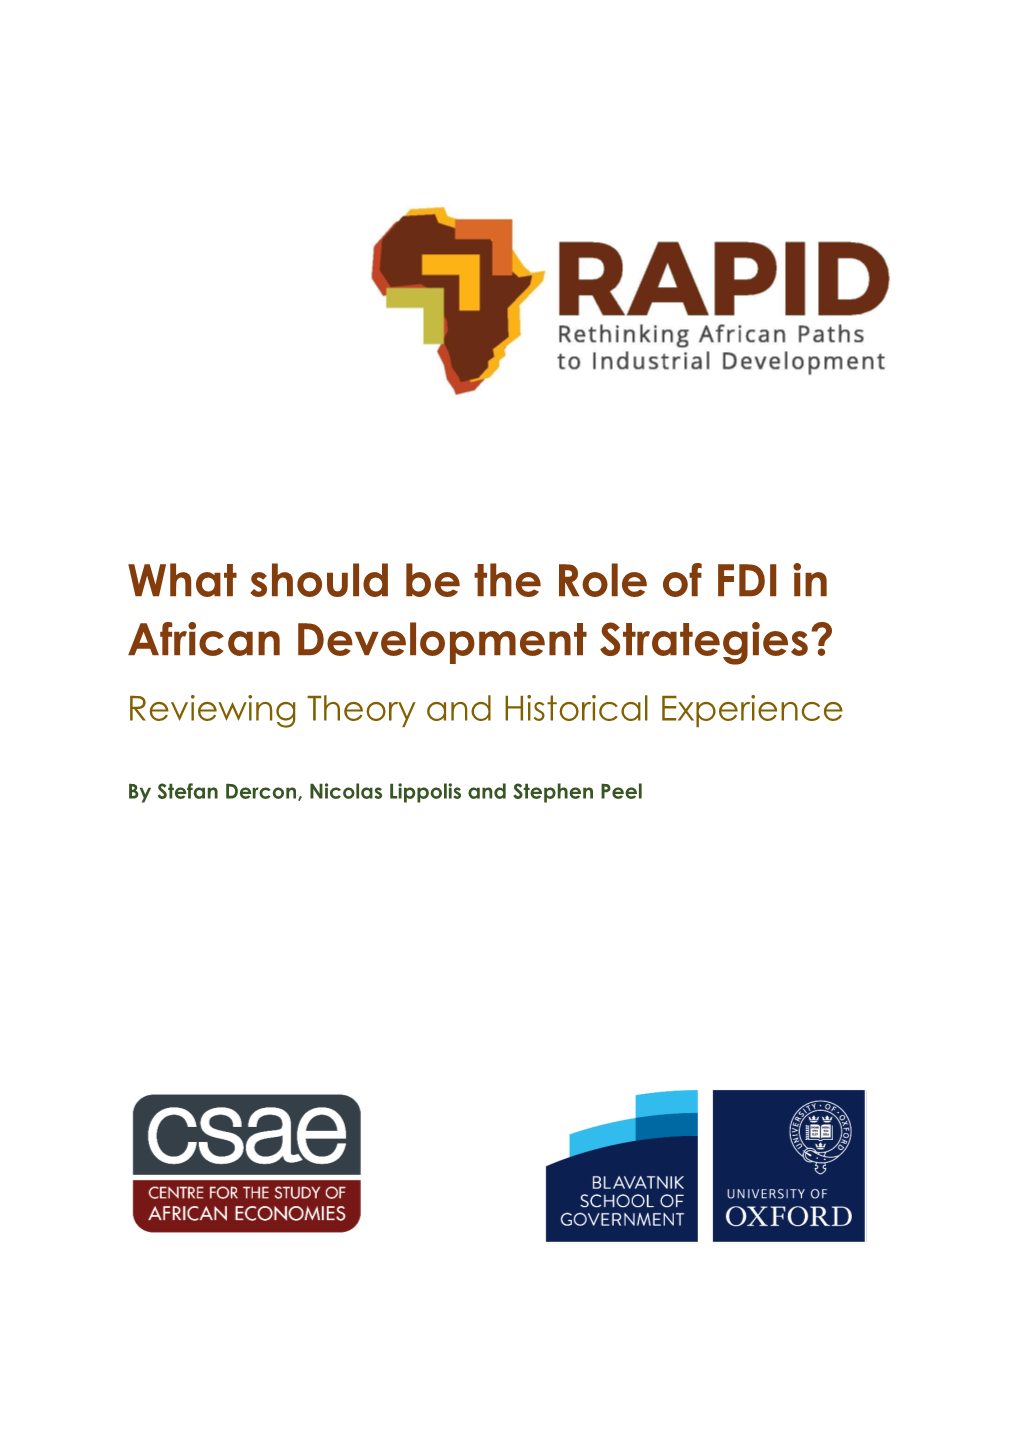 What Should Be the Role of FDI in African Development Strategies?